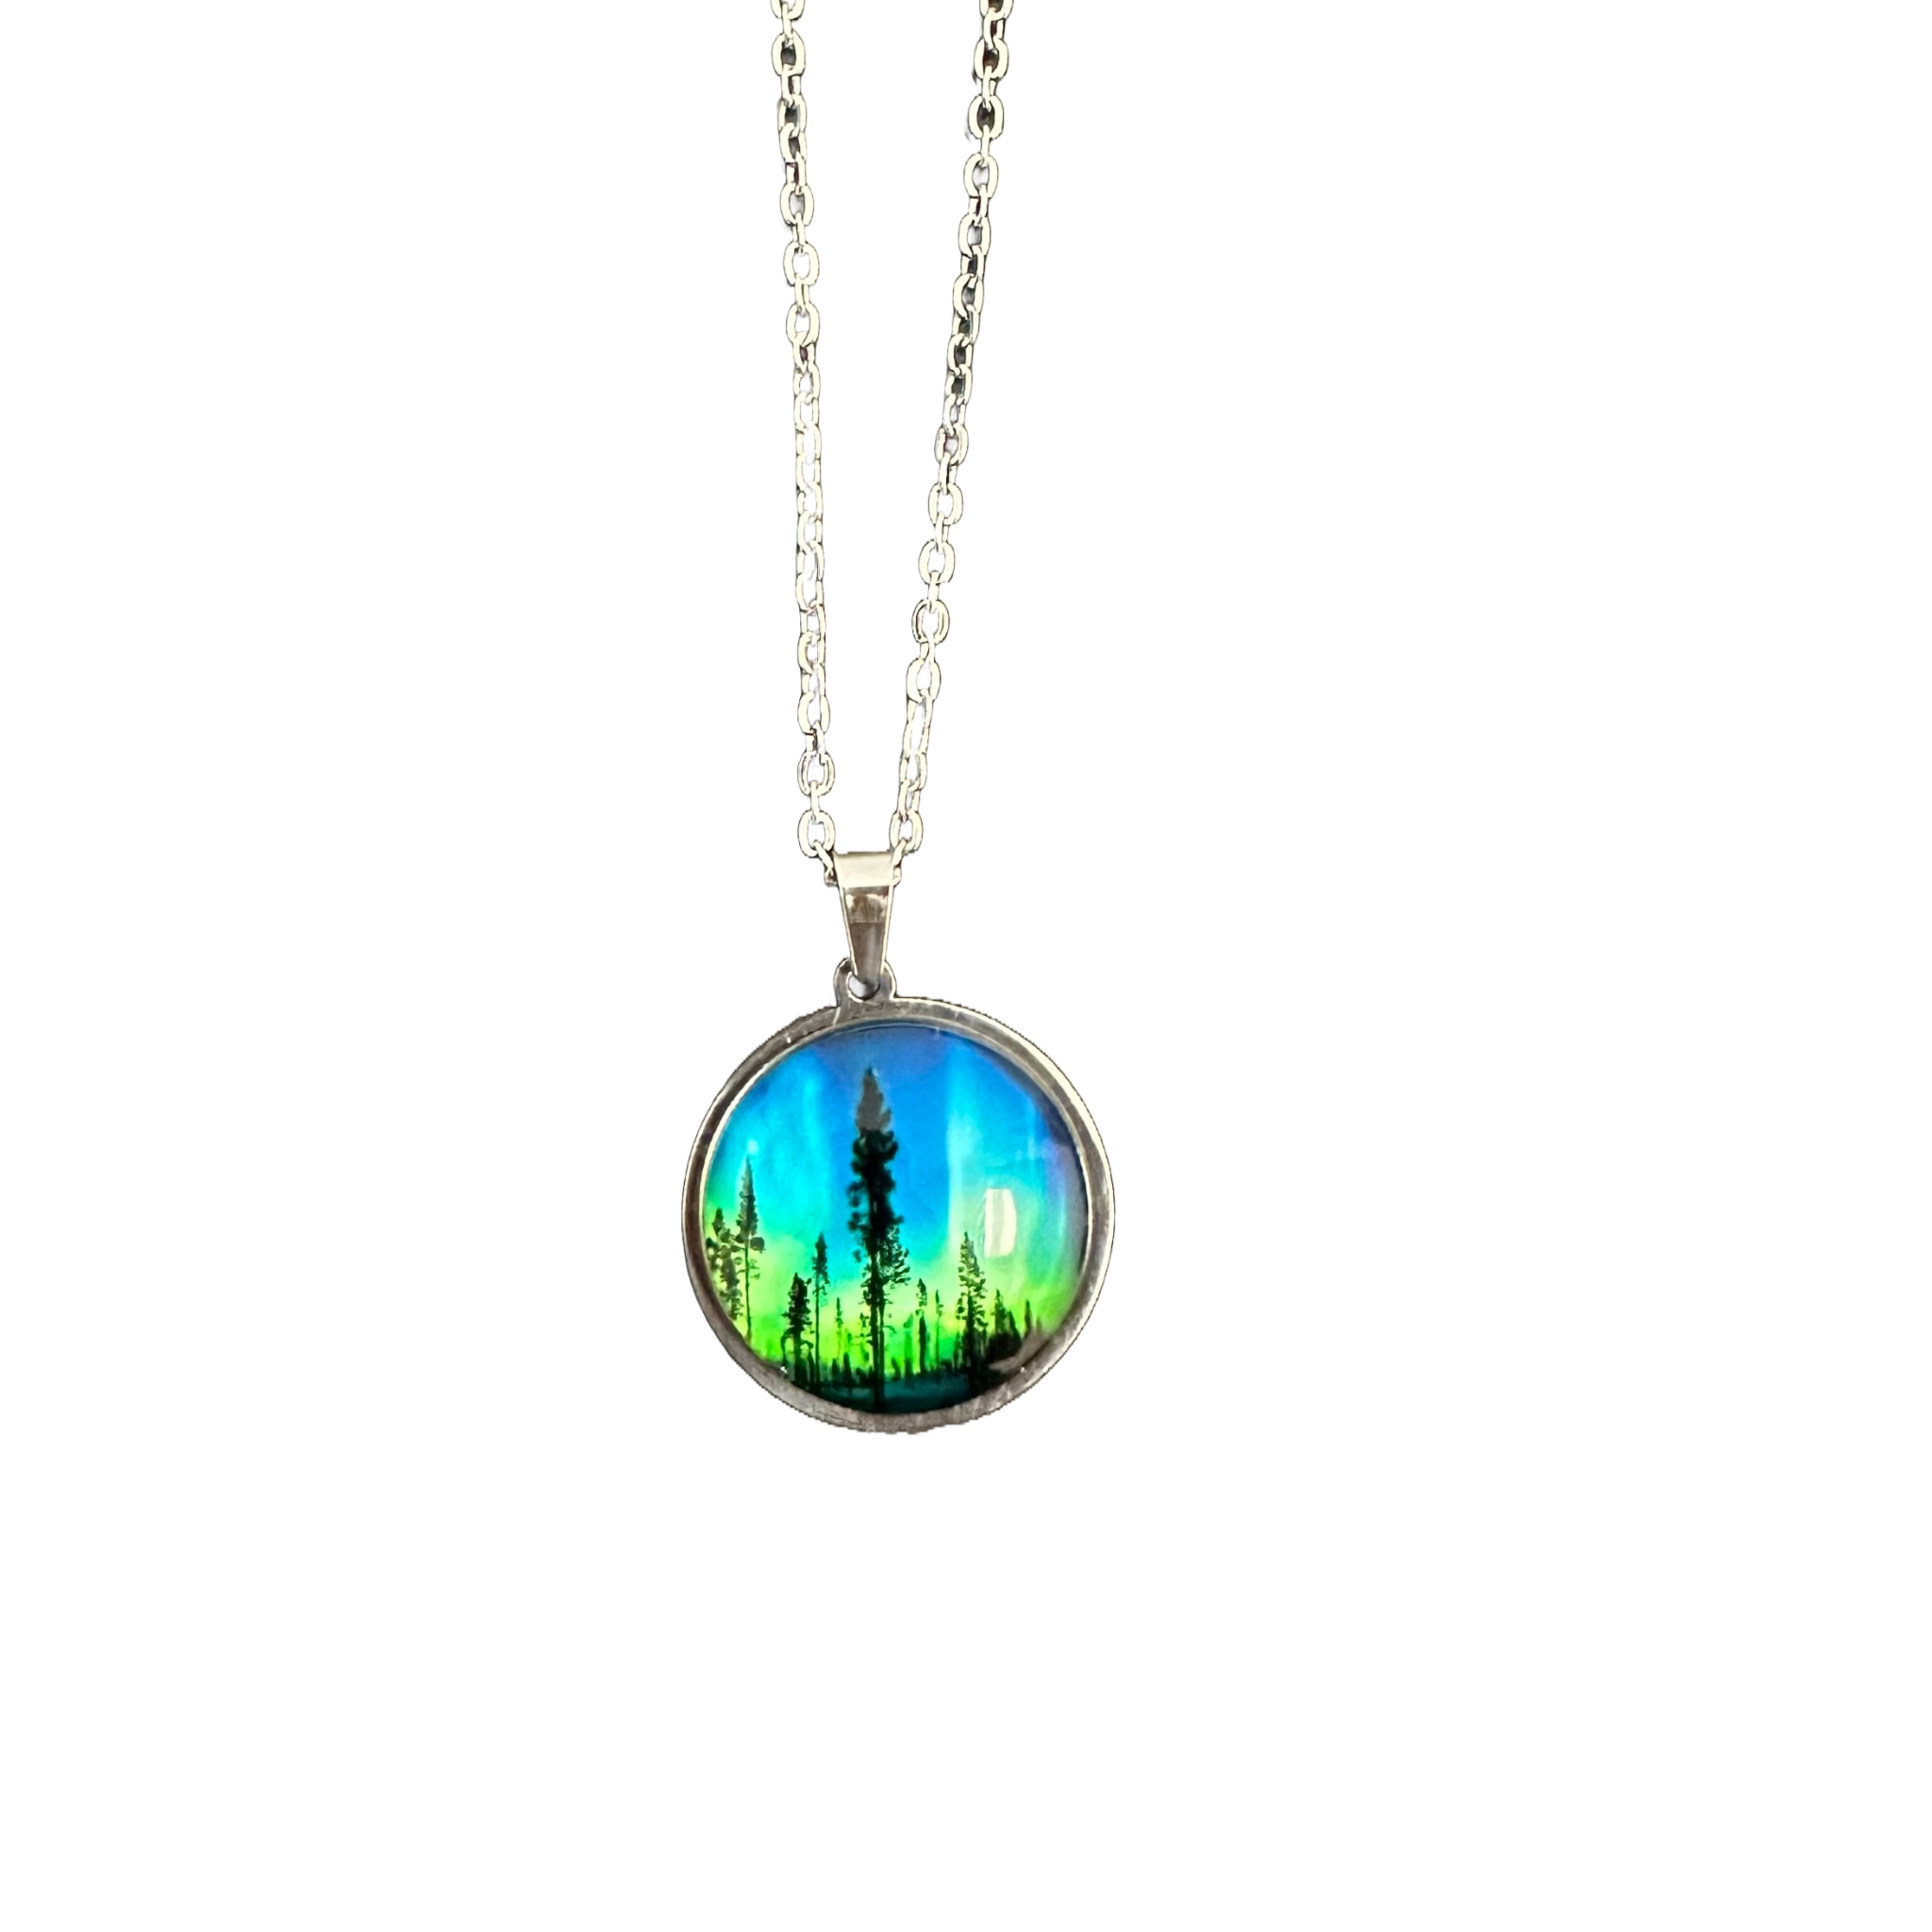 Northern Lights Stainless Steel Necklace